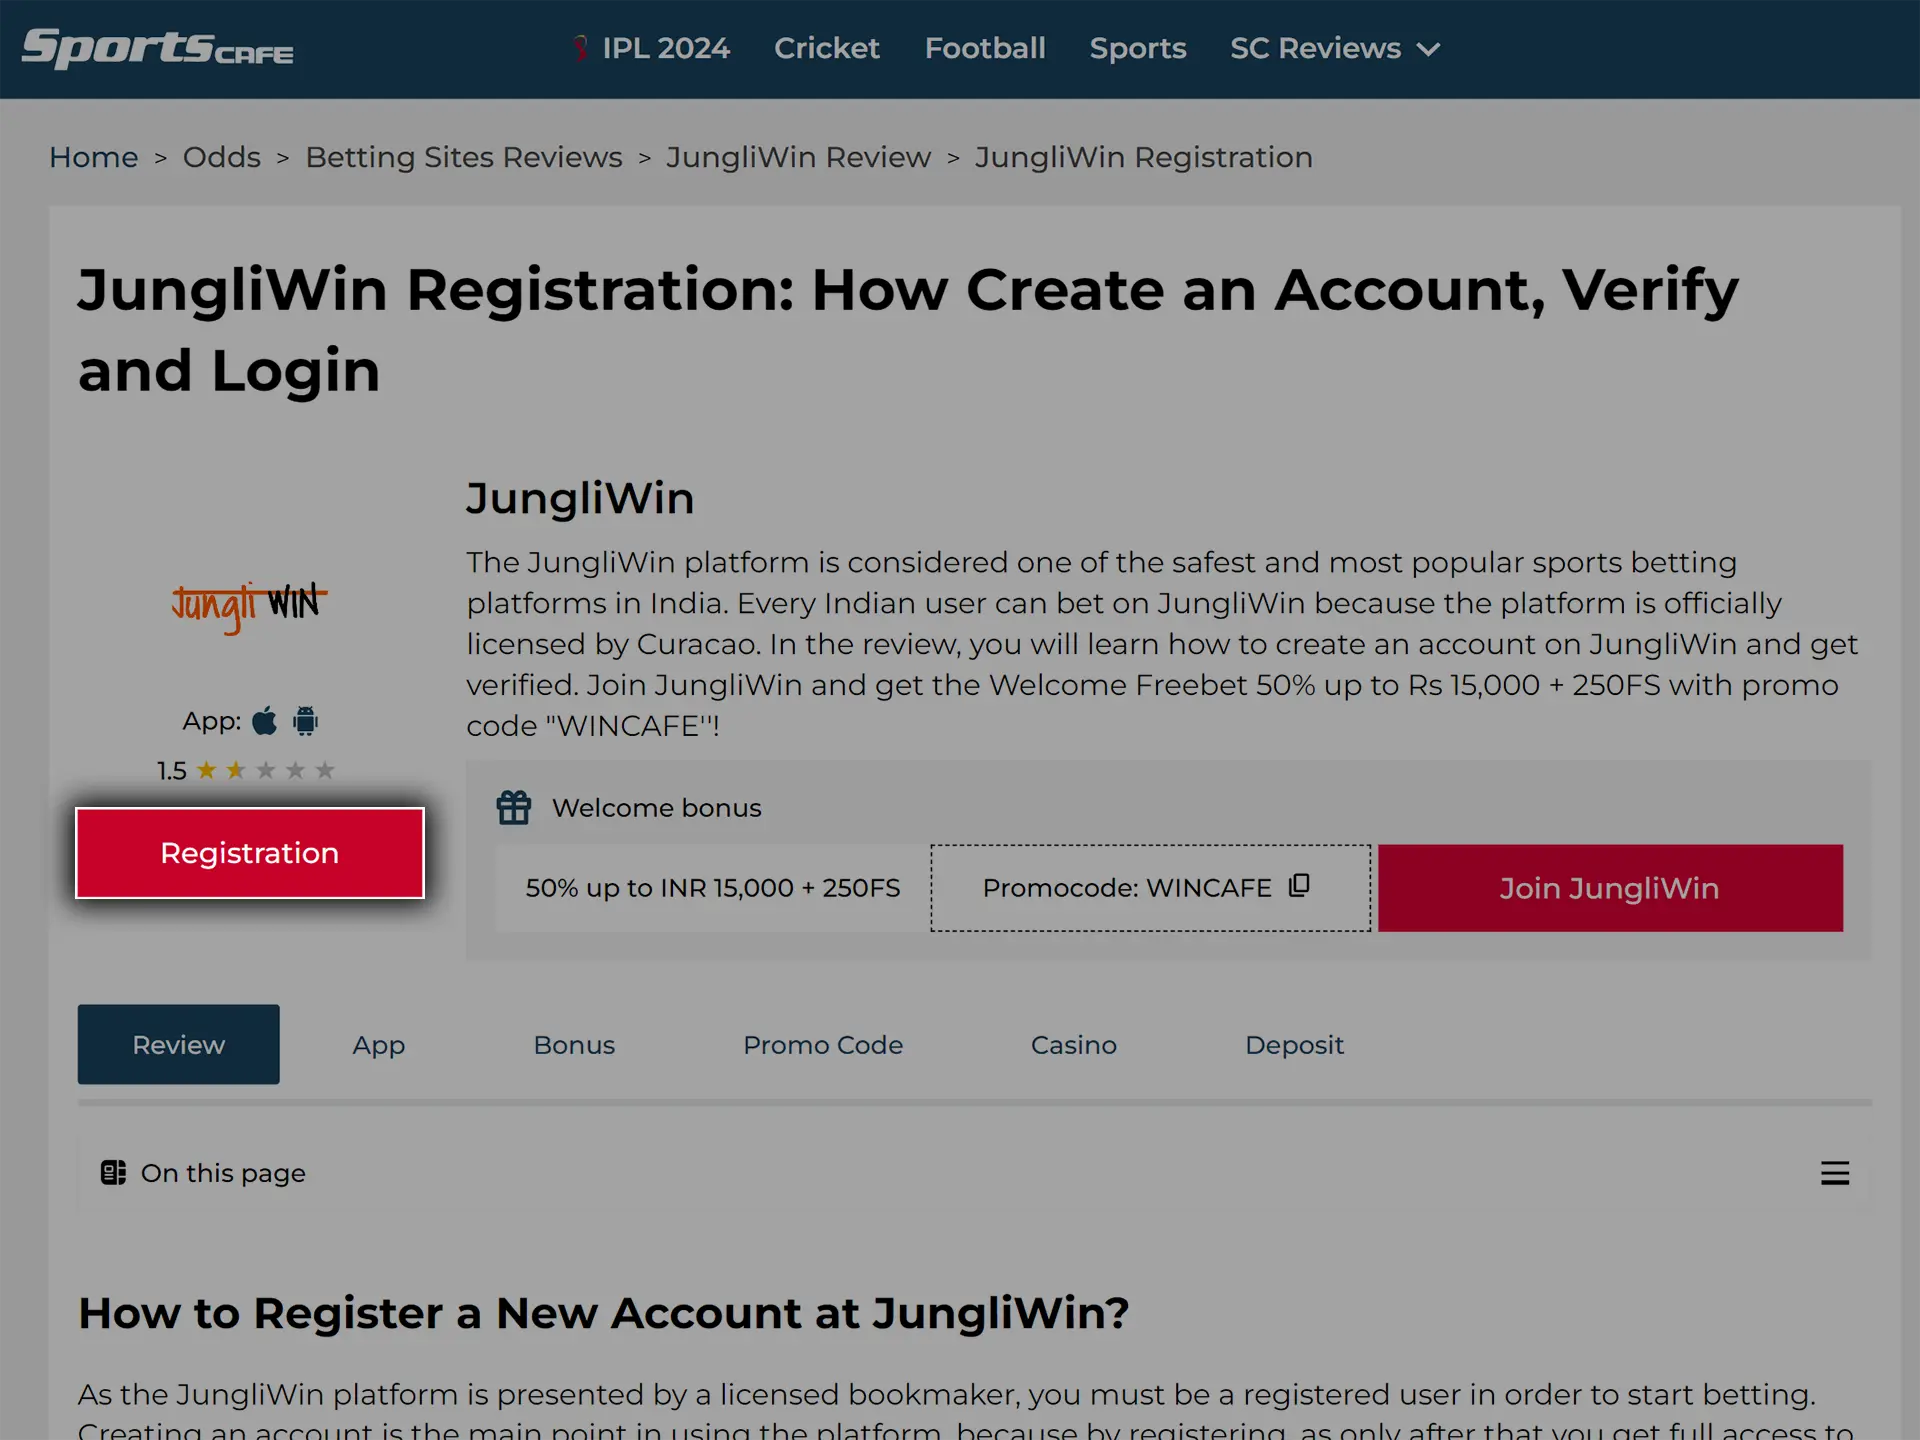 Go to the JungliWin website to start registering.Go to the JungliWin website to start registering.